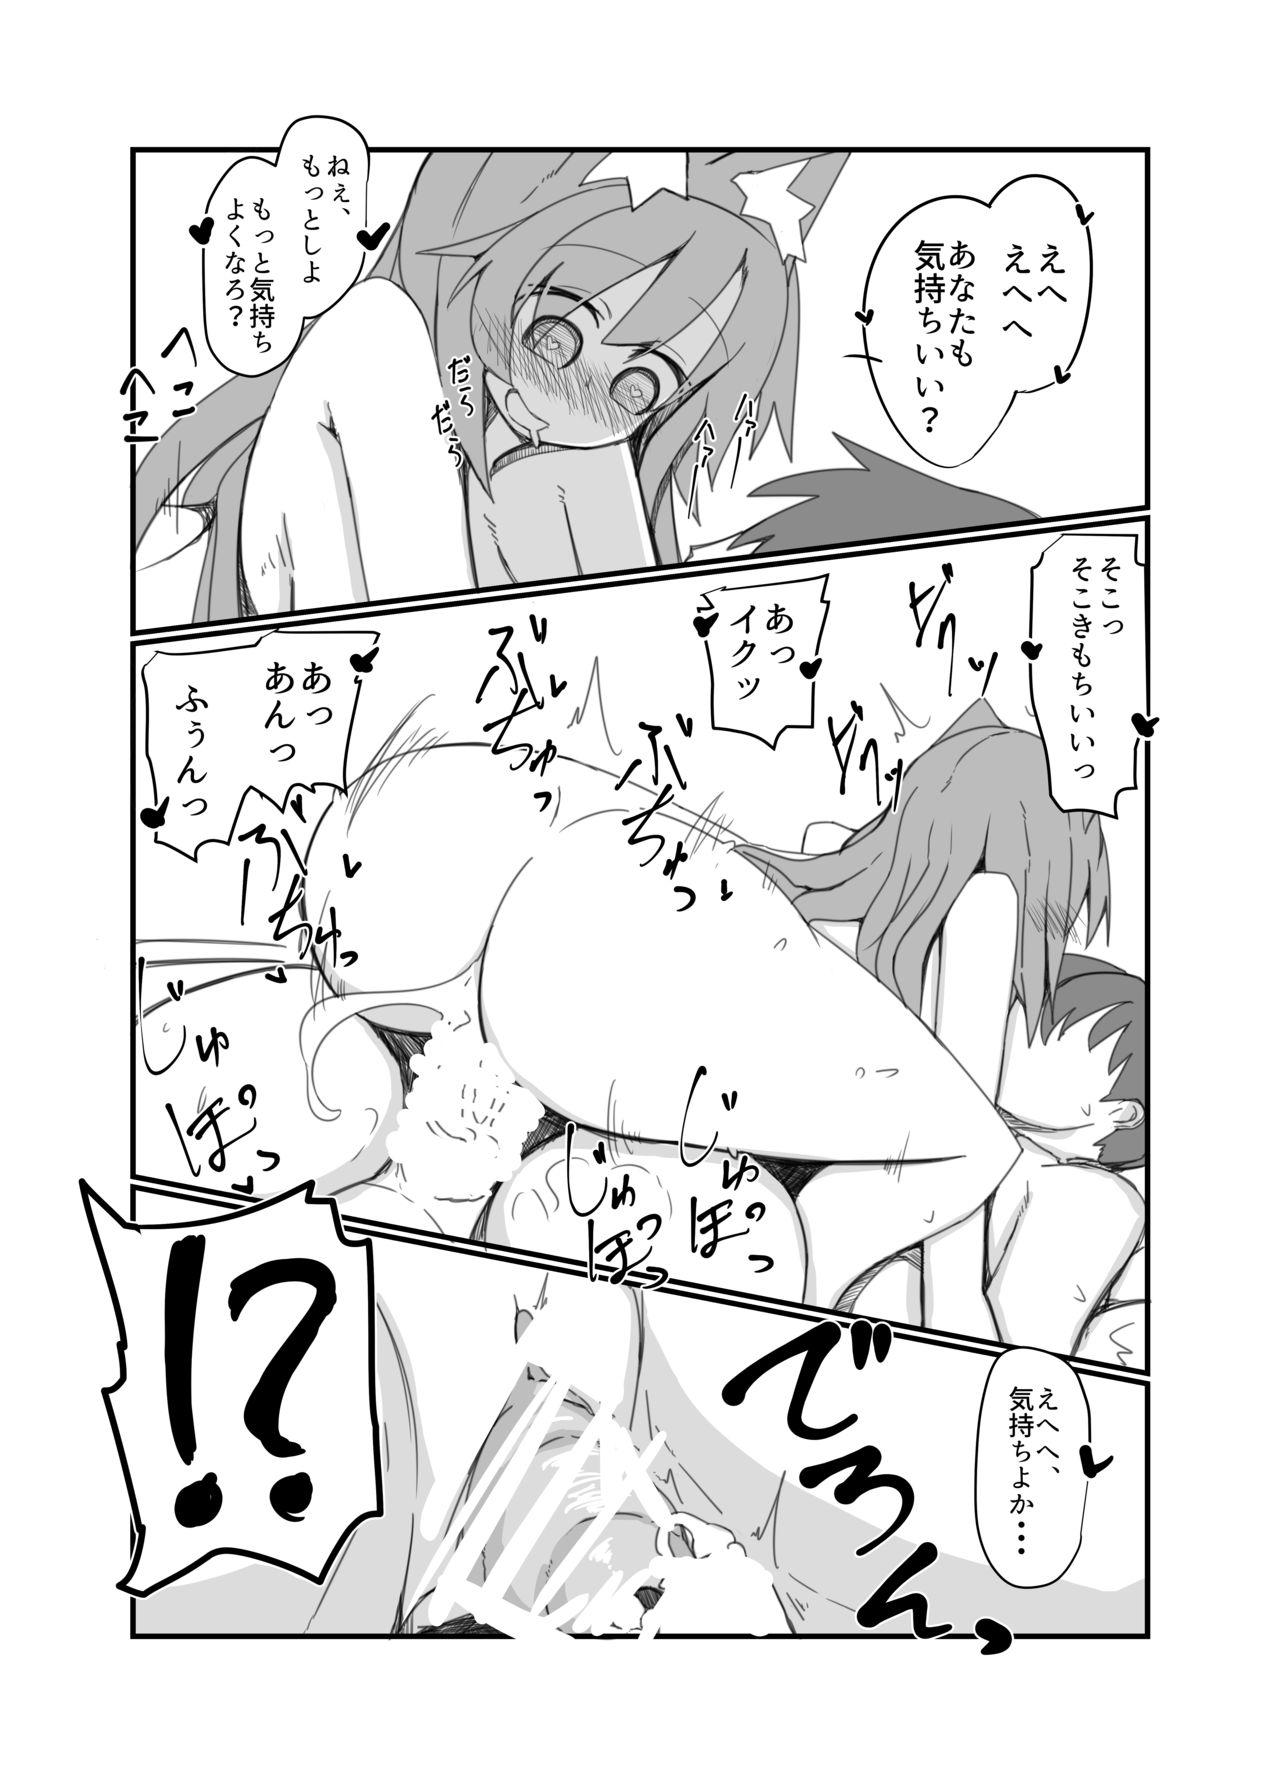 Bisexual 発情期影狼ちゃんと子宮脱ックス - Touhou project Bus - Page 2